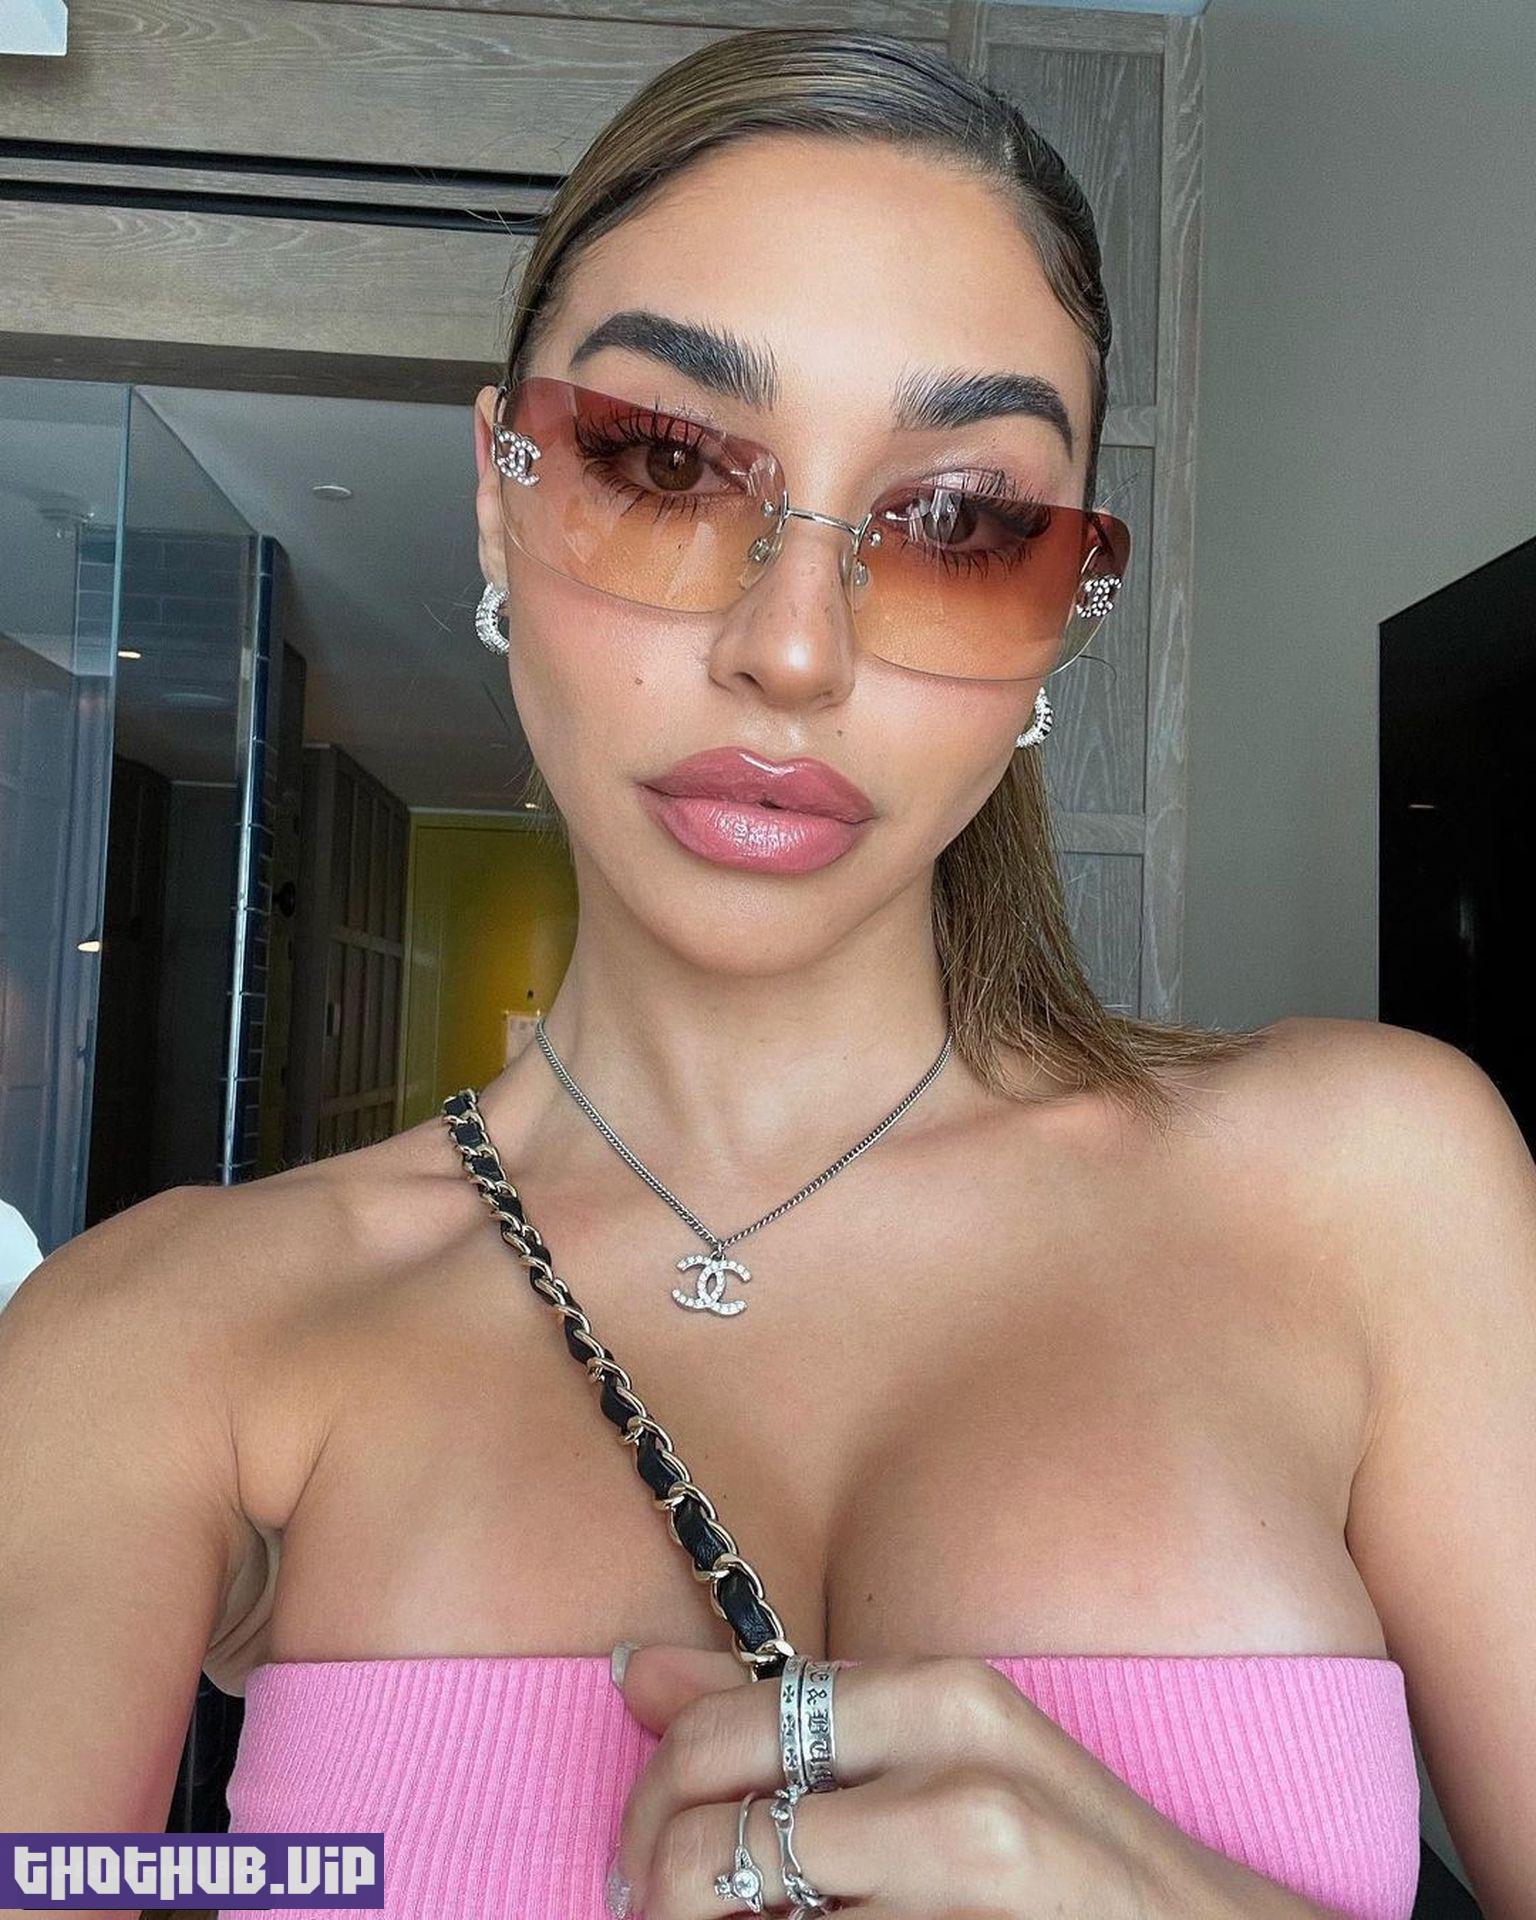 Chantle Jeffries Beautiful Cleavage thefappeningblog.com